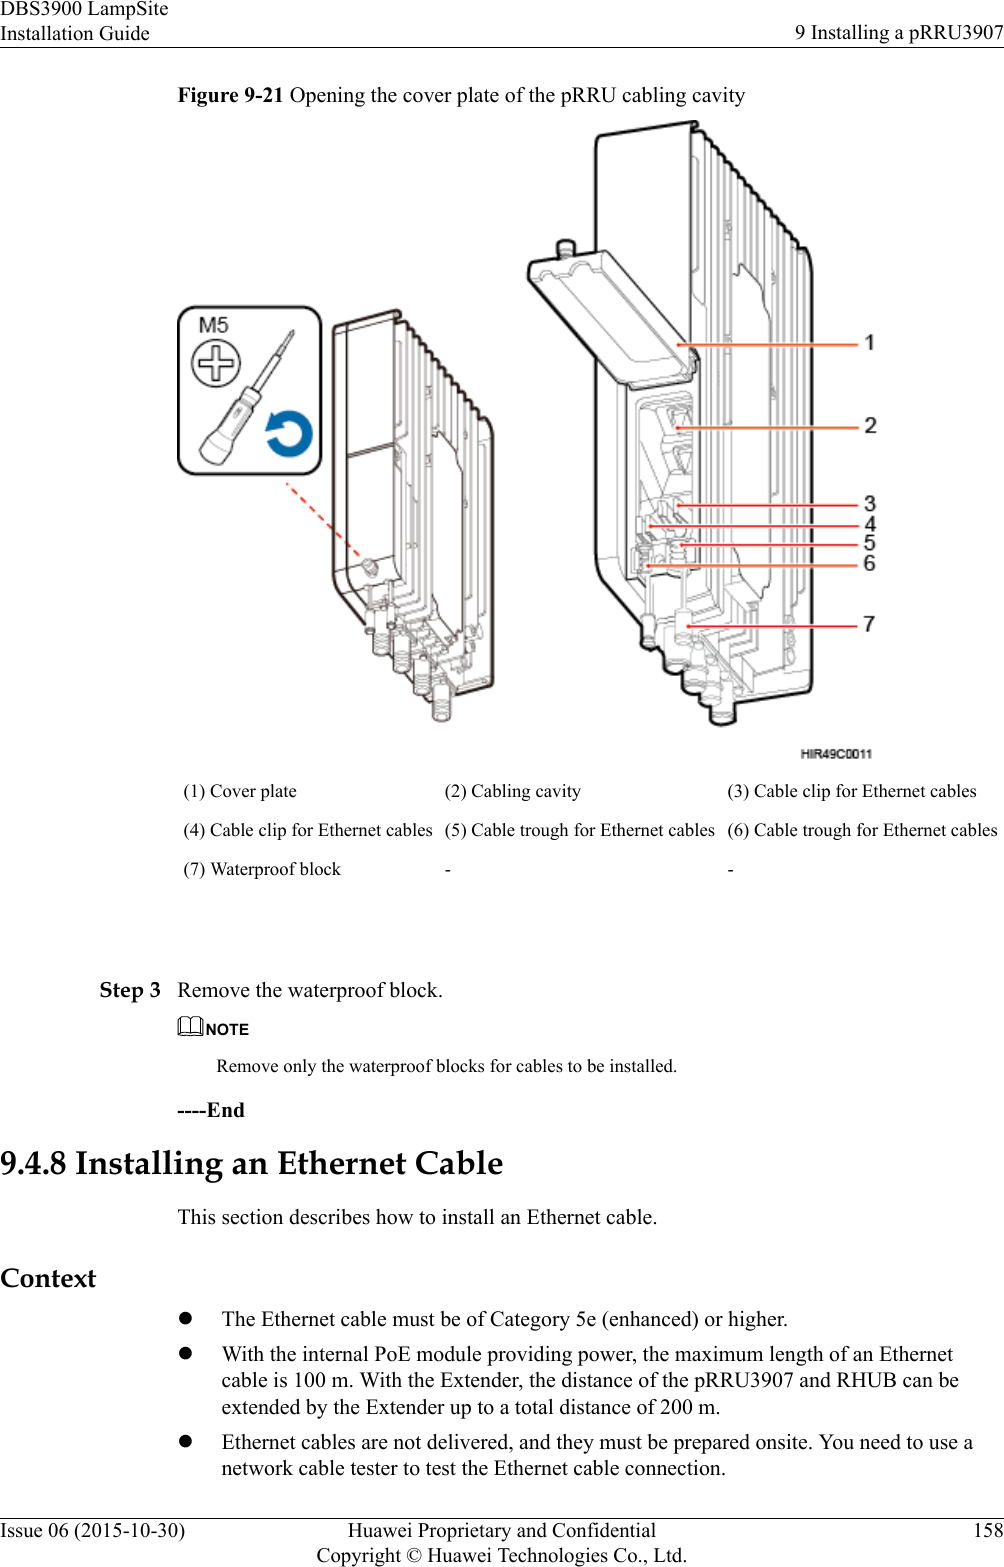 Figure 9-21 Opening the cover plate of the pRRU cabling cavity(1) Cover plate (2) Cabling cavity (3) Cable clip for Ethernet cables(4) Cable clip for Ethernet cables (5) Cable trough for Ethernet cables (6) Cable trough for Ethernet cables(7) Waterproof block - - Step 3 Remove the waterproof block.NOTERemove only the waterproof blocks for cables to be installed.----End9.4.8 Installing an Ethernet CableThis section describes how to install an Ethernet cable.ContextlThe Ethernet cable must be of Category 5e (enhanced) or higher.lWith the internal PoE module providing power, the maximum length of an Ethernetcable is 100 m. With the Extender, the distance of the pRRU3907 and RHUB can beextended by the Extender up to a total distance of 200 m.lEthernet cables are not delivered, and they must be prepared onsite. You need to use anetwork cable tester to test the Ethernet cable connection.DBS3900 LampSiteInstallation Guide 9 Installing a pRRU3907Issue 06 (2015-10-30) Huawei Proprietary and ConfidentialCopyright © Huawei Technologies Co., Ltd.158